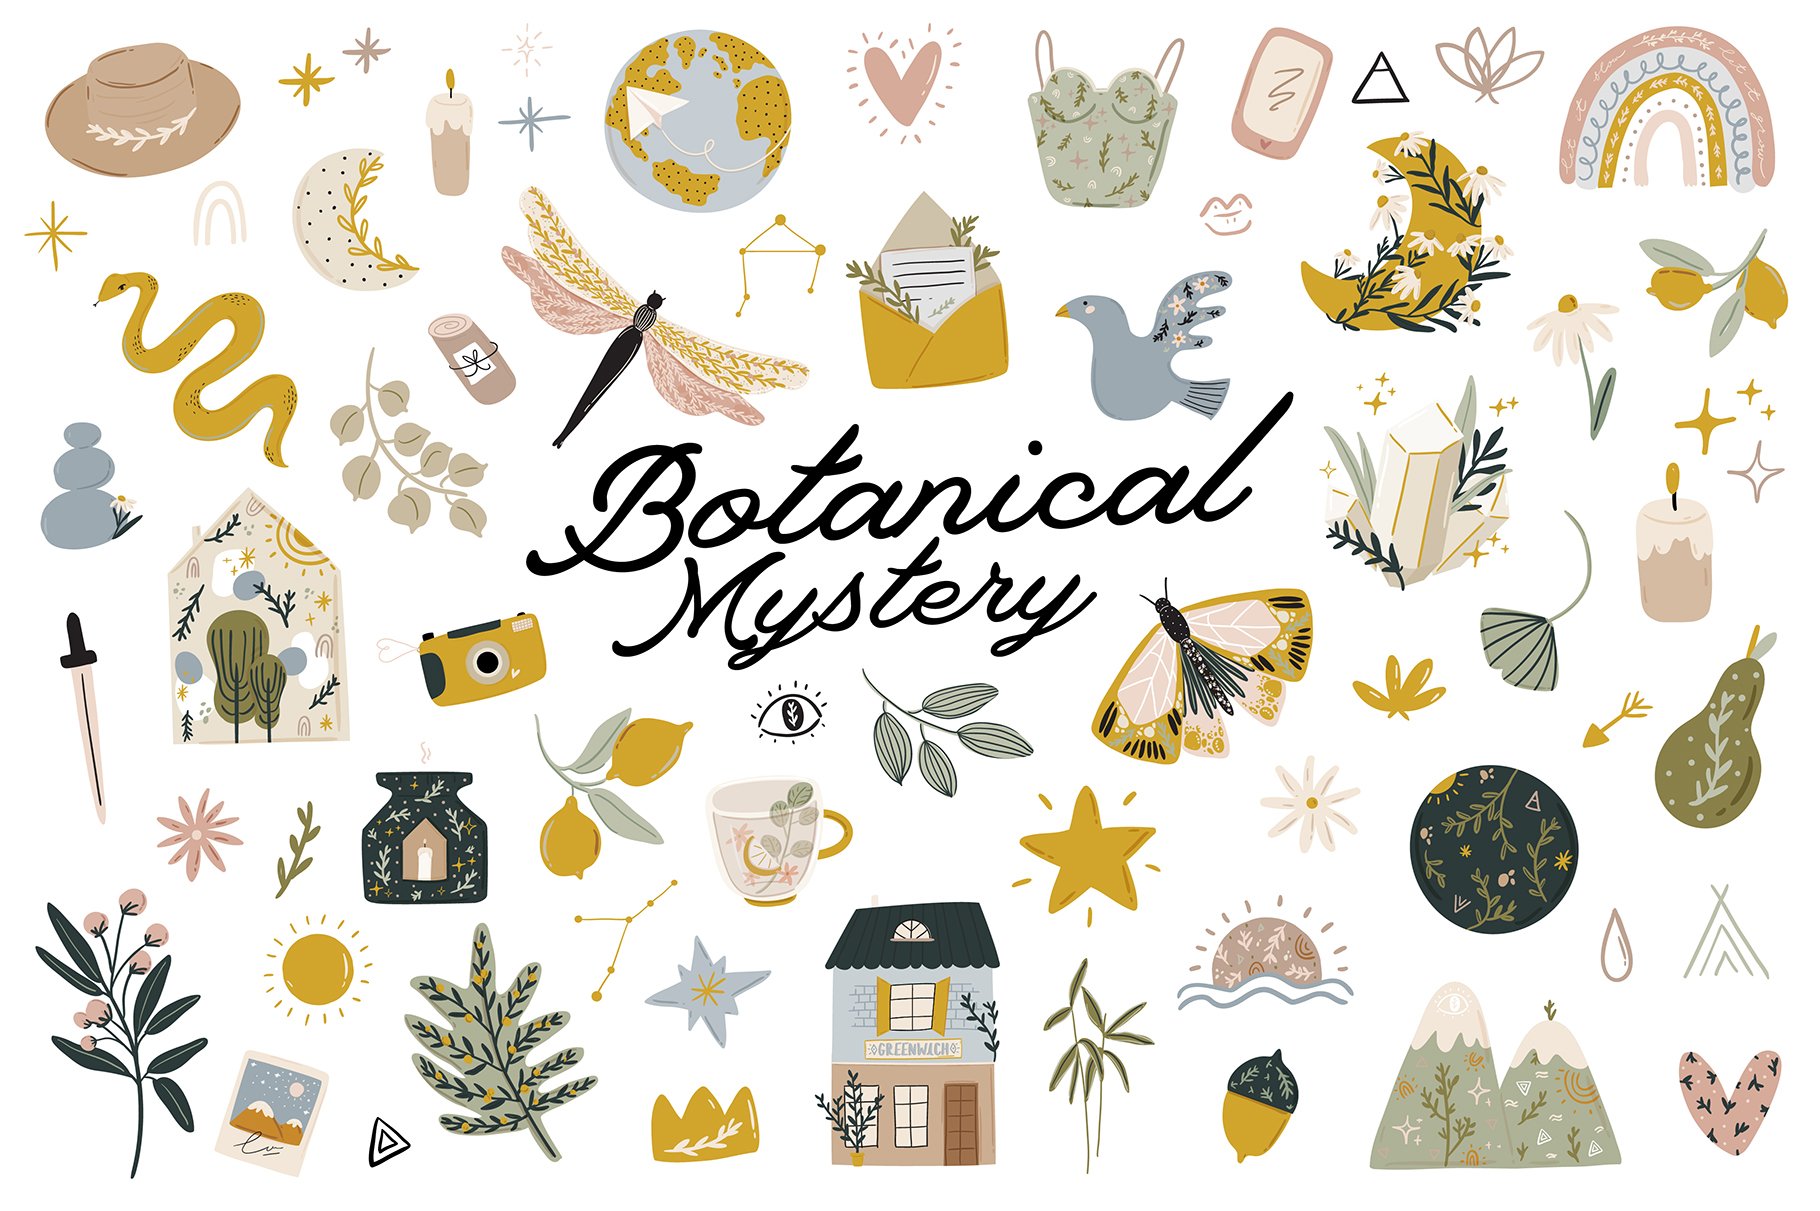 Botanical & Nature Mystery cover image.